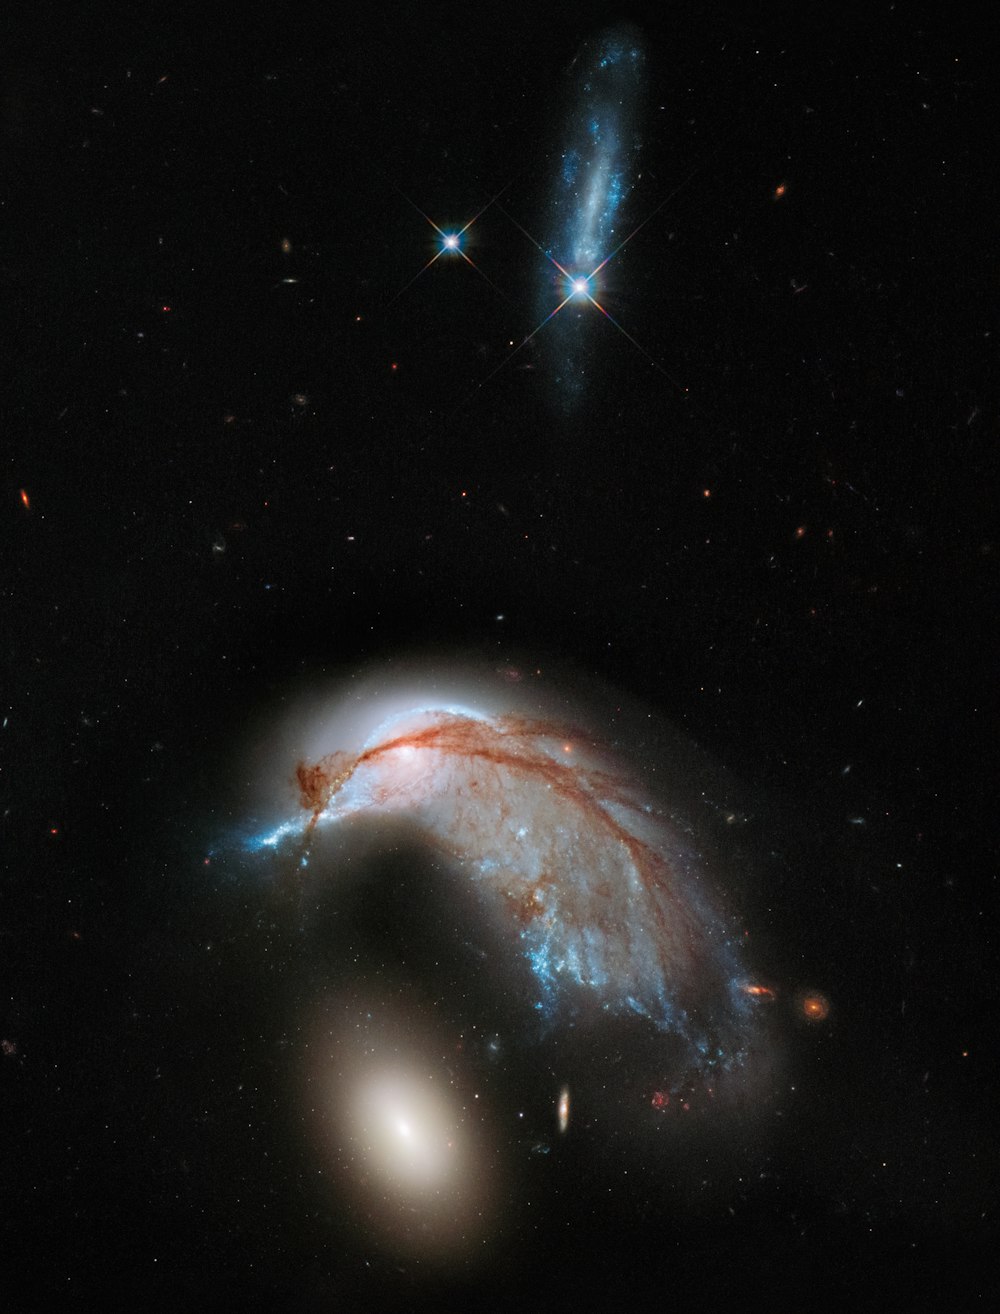 two spiral shaped objects in the dark sky